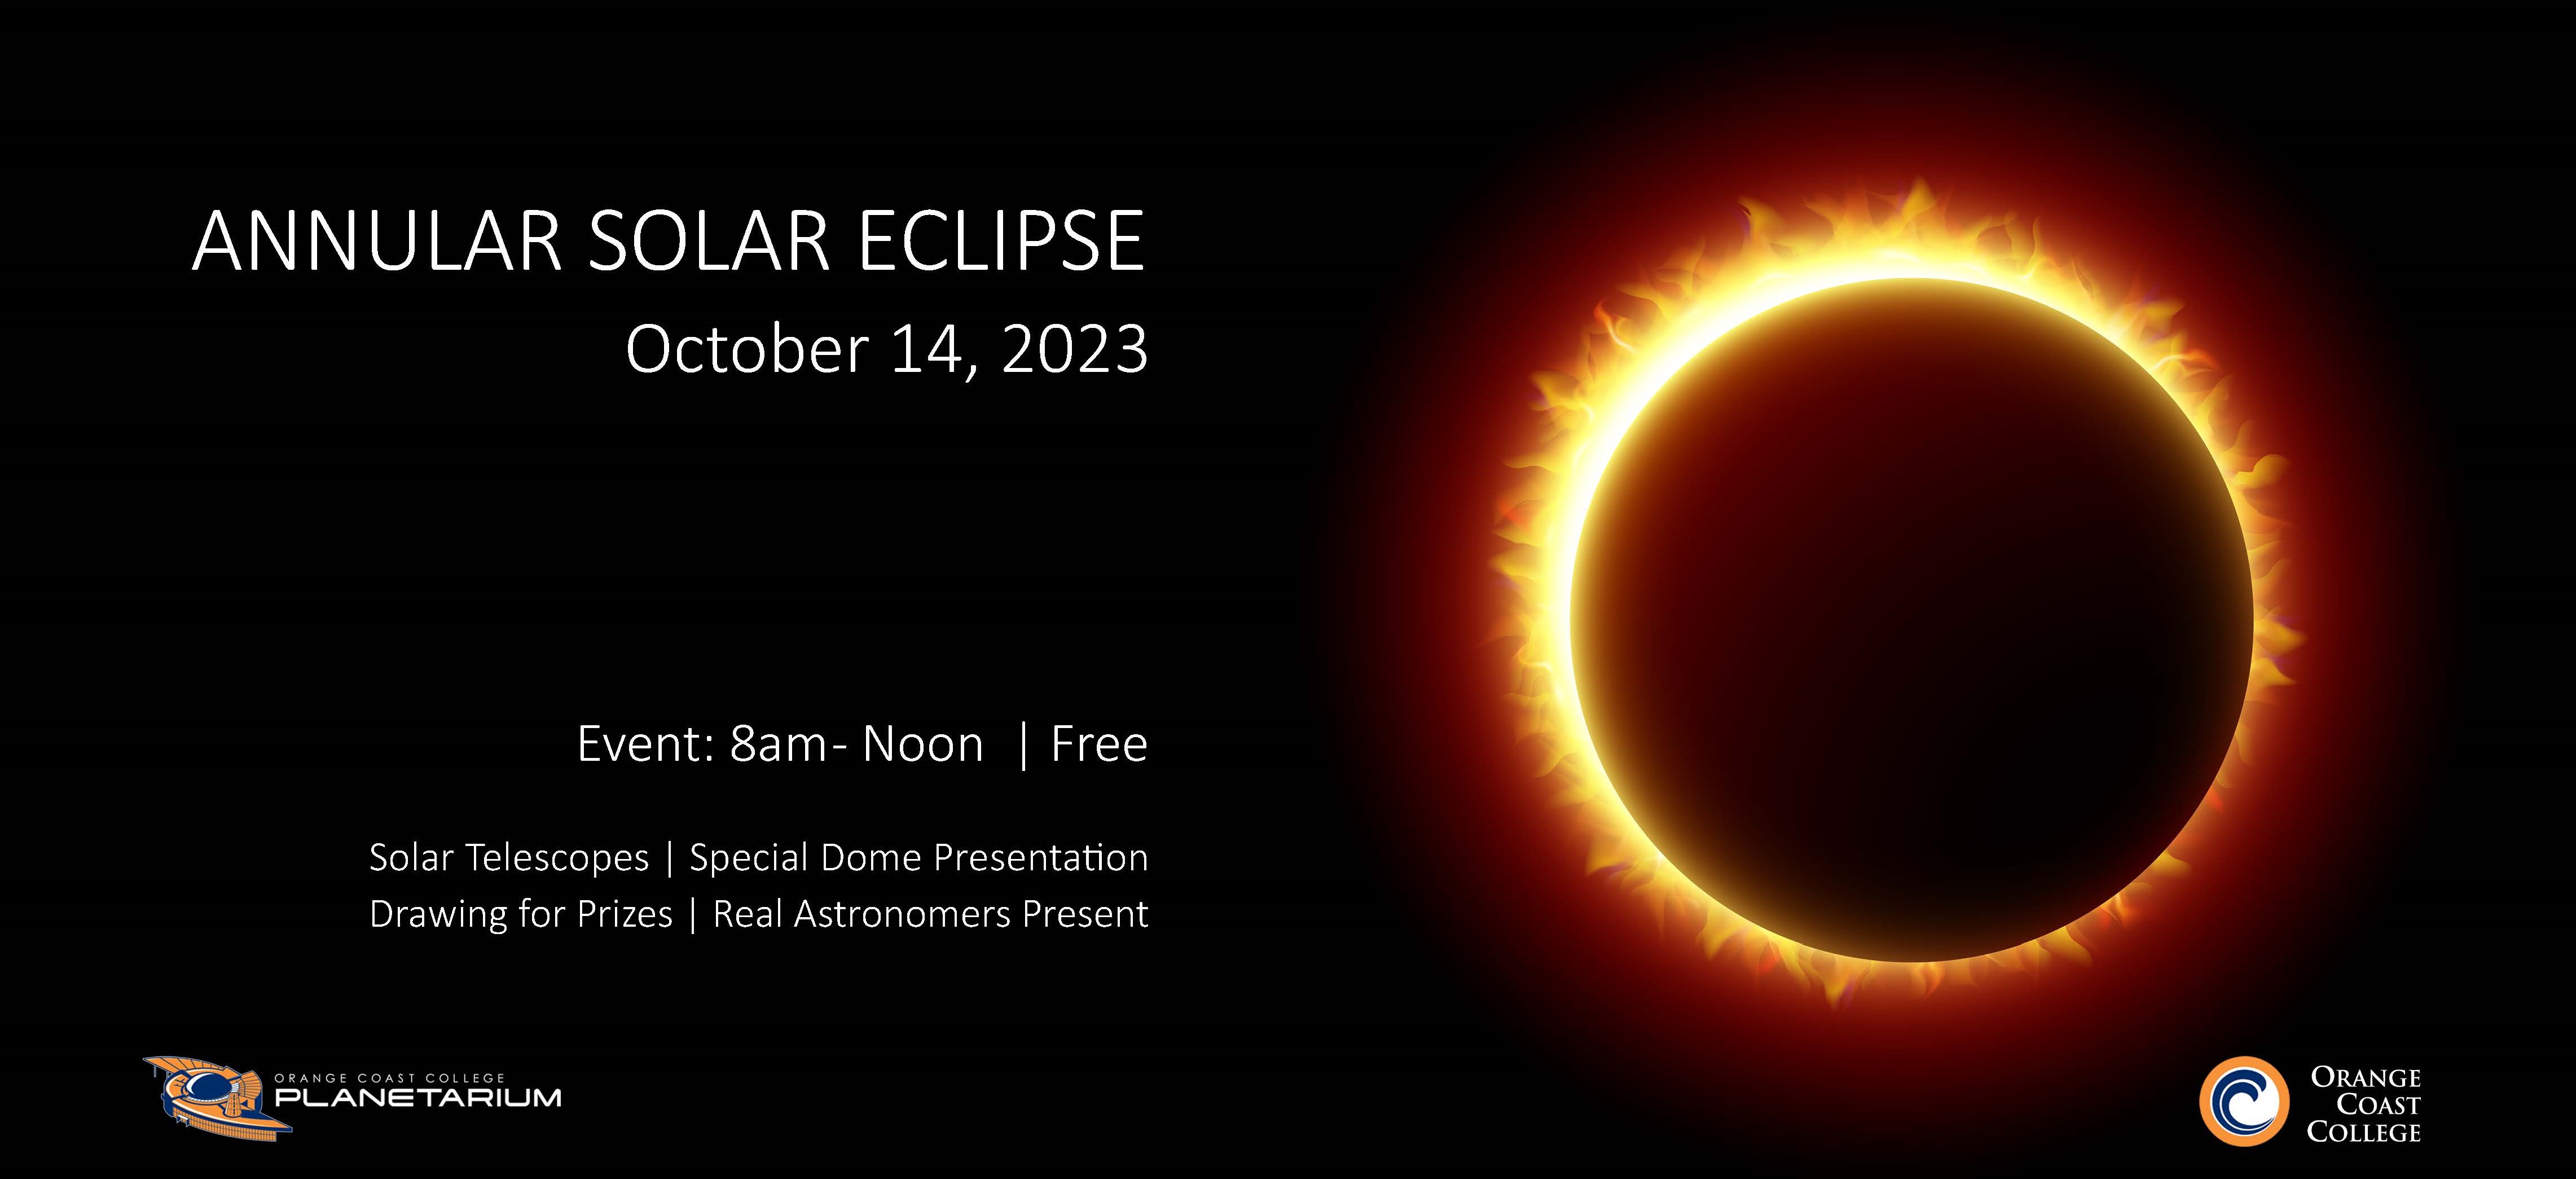 Postcard advertisement for OCC's solar eclipse event on 10/14/23